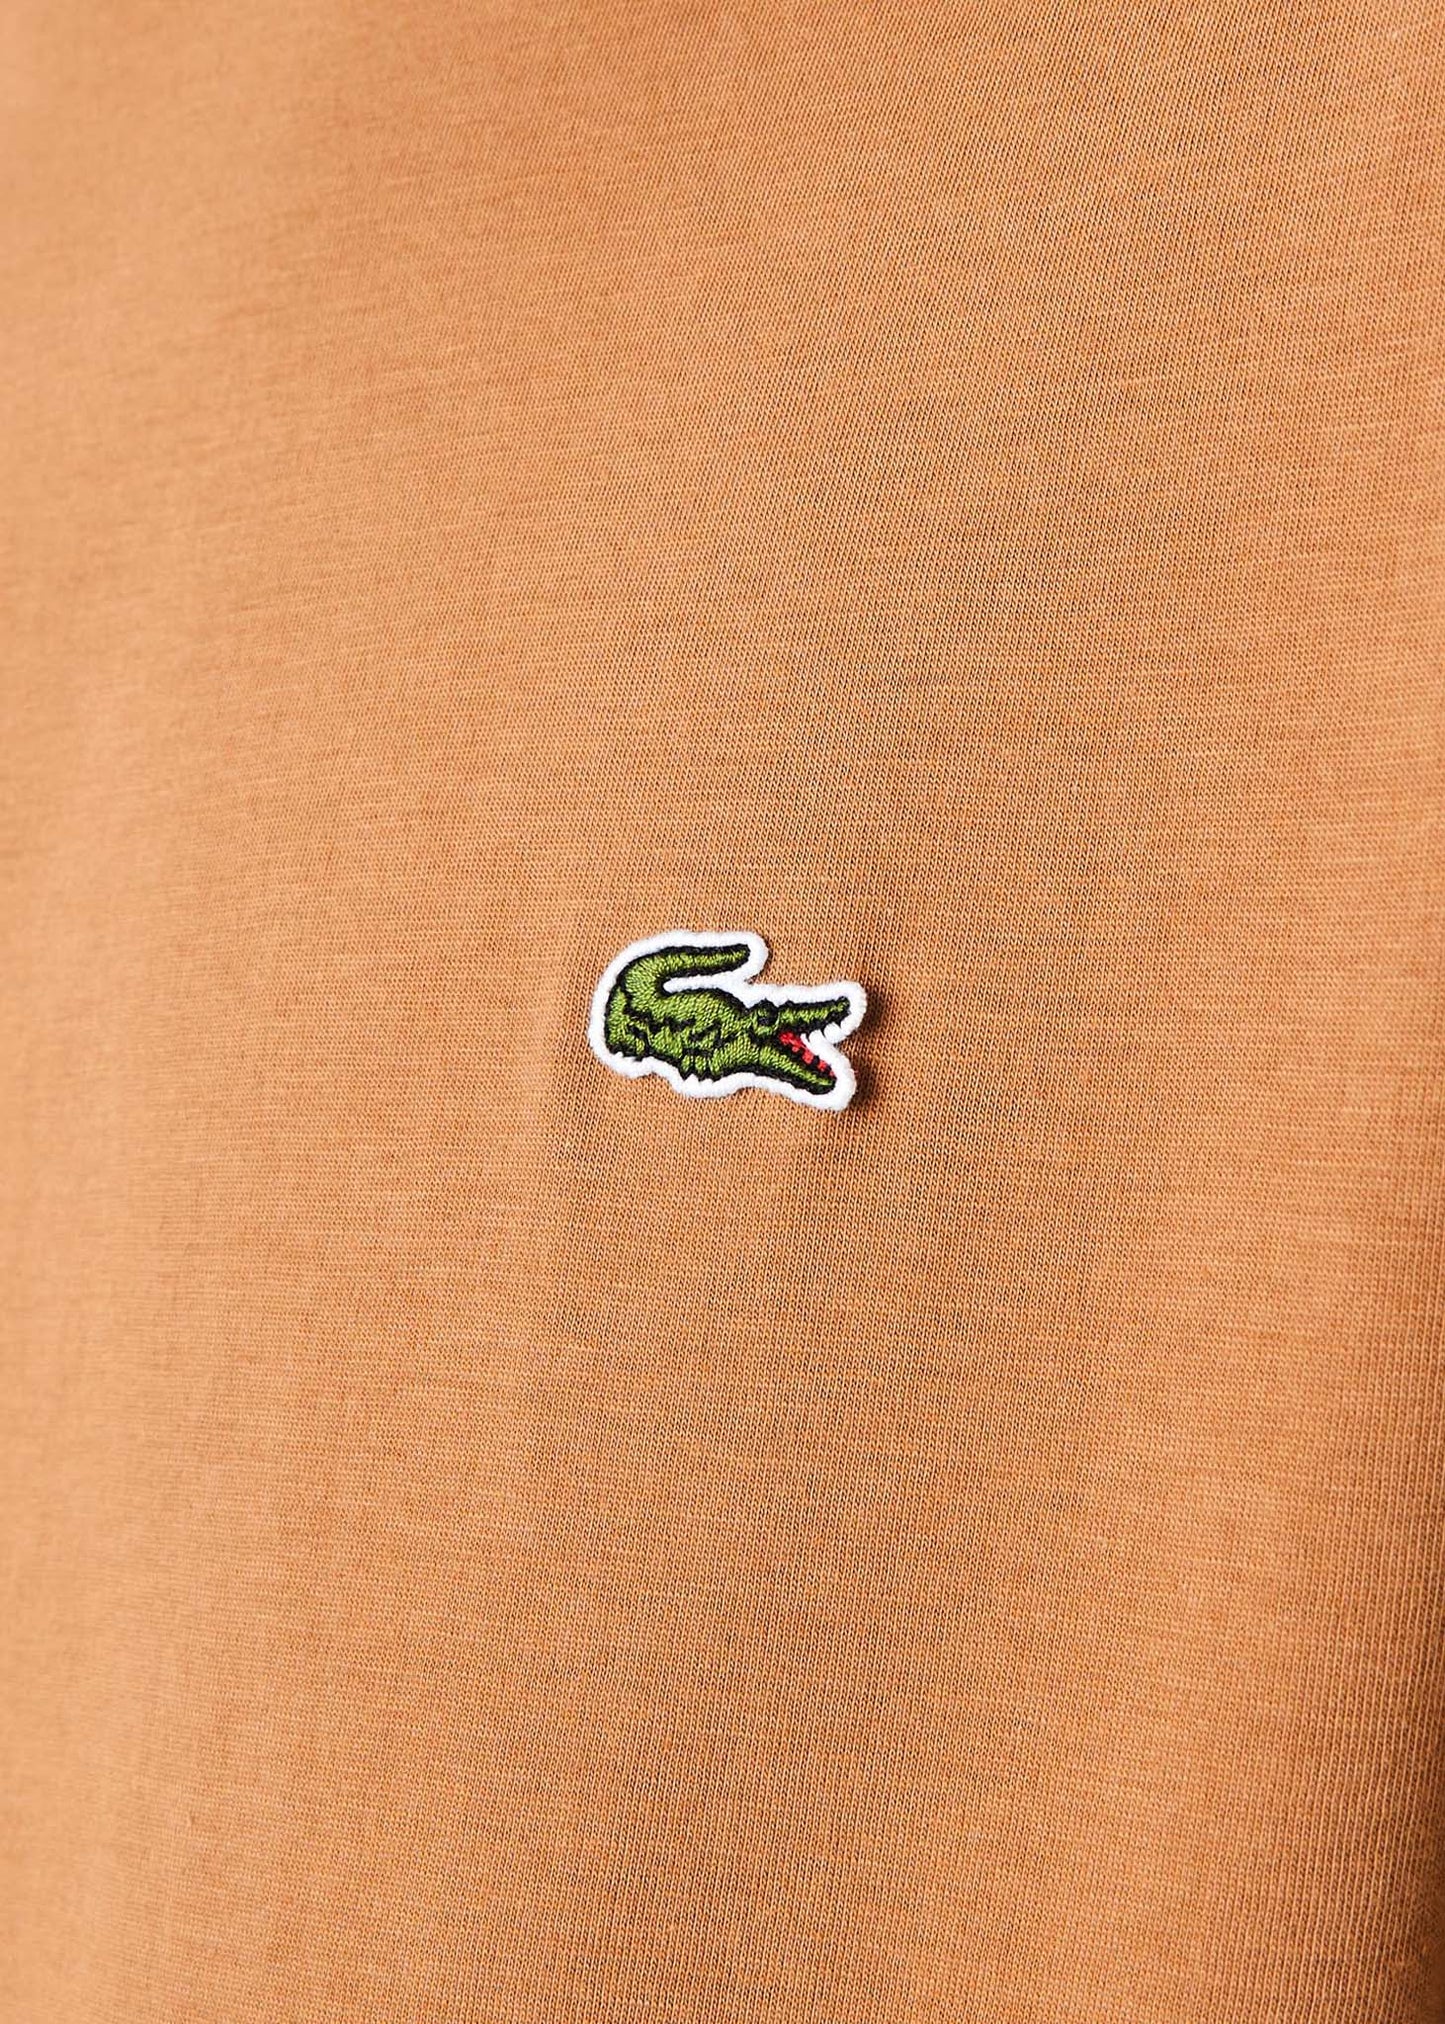 Lacoste t-shirt leafy brown